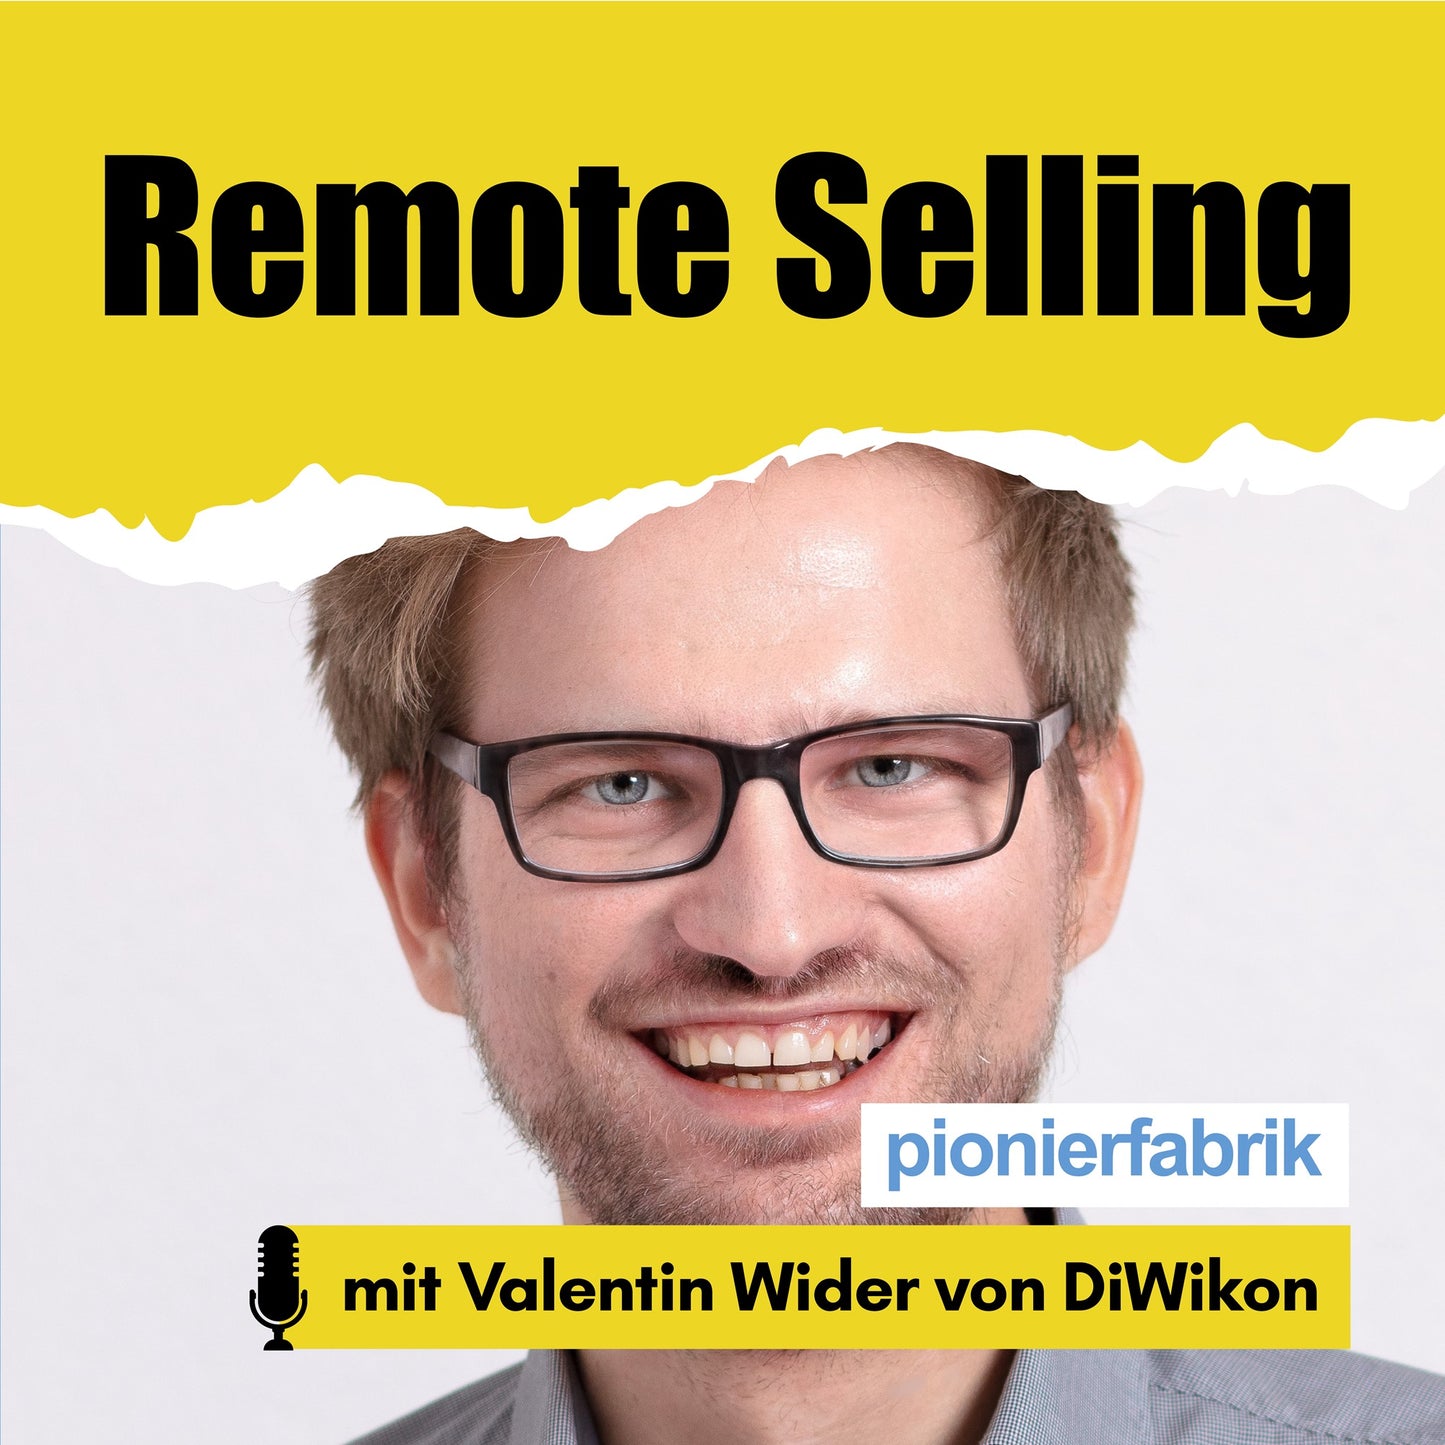 27.01.2021 | "Remote Selling"